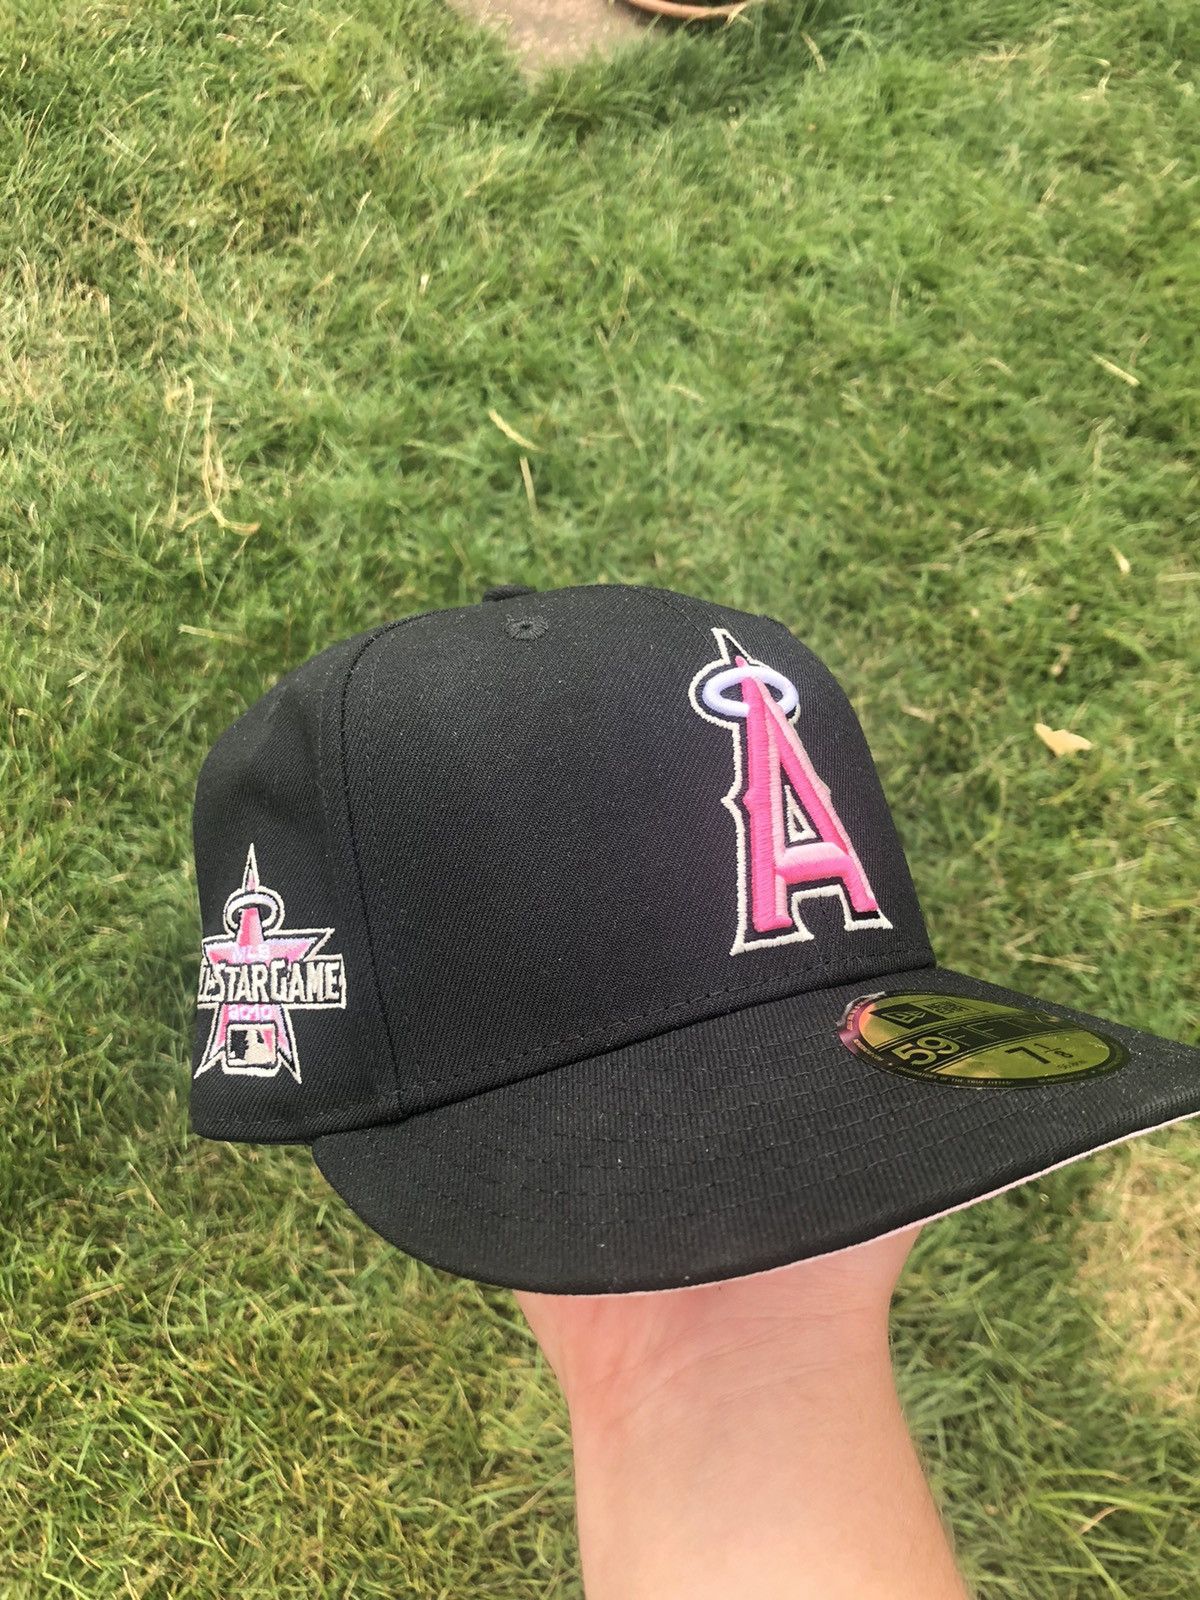 Los Angeles Angels on X: Just restocked! 🛍 Get a head start on